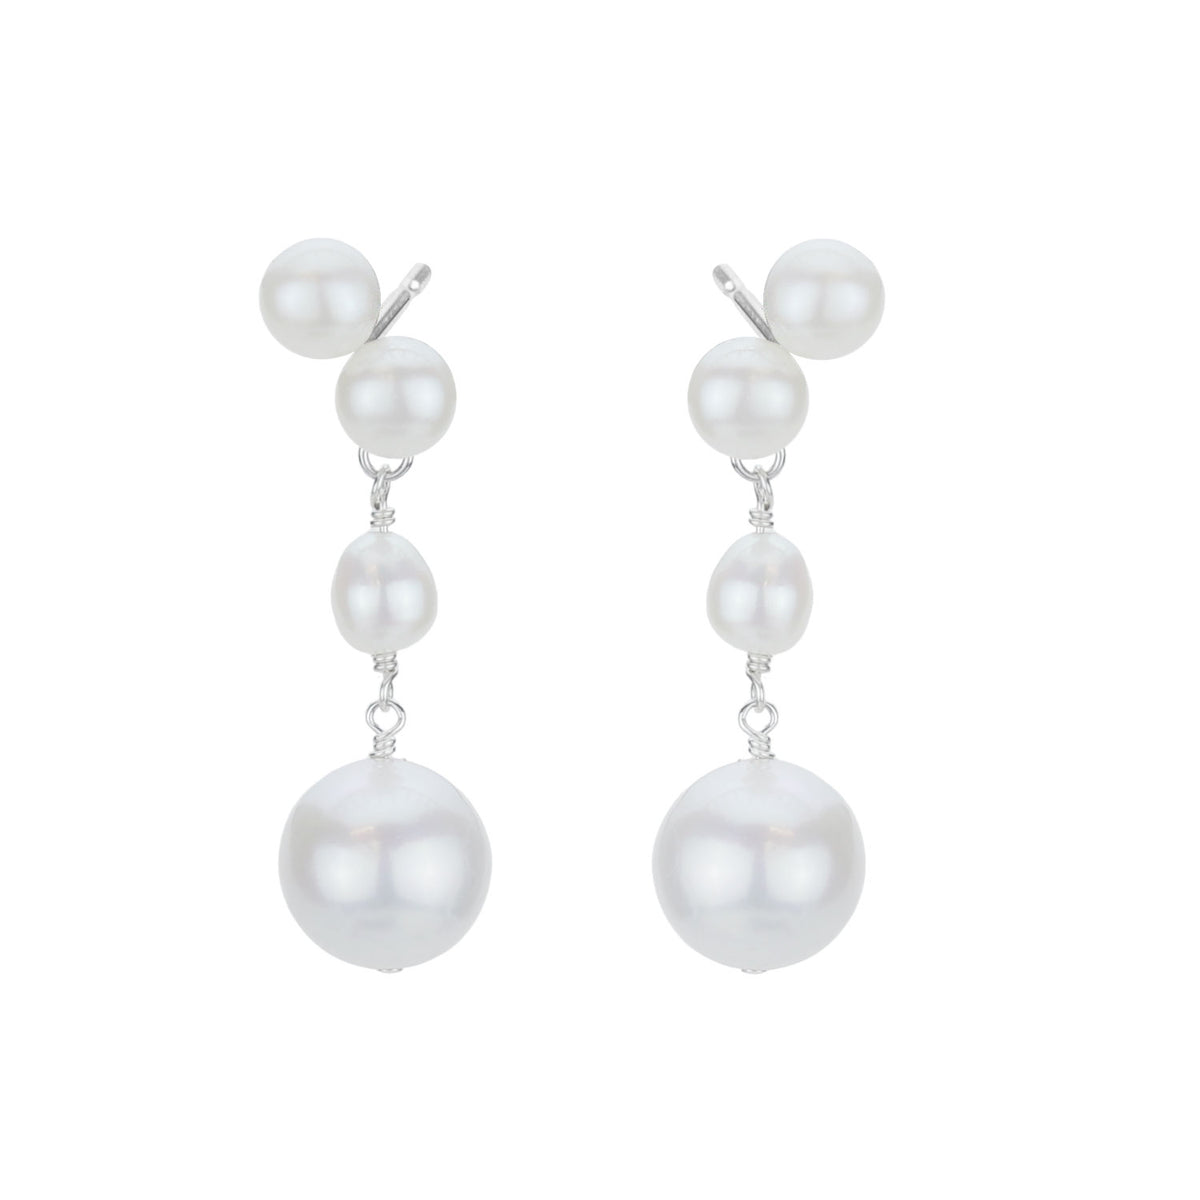 Double Pearl Studs with Pearl Drop Earrings